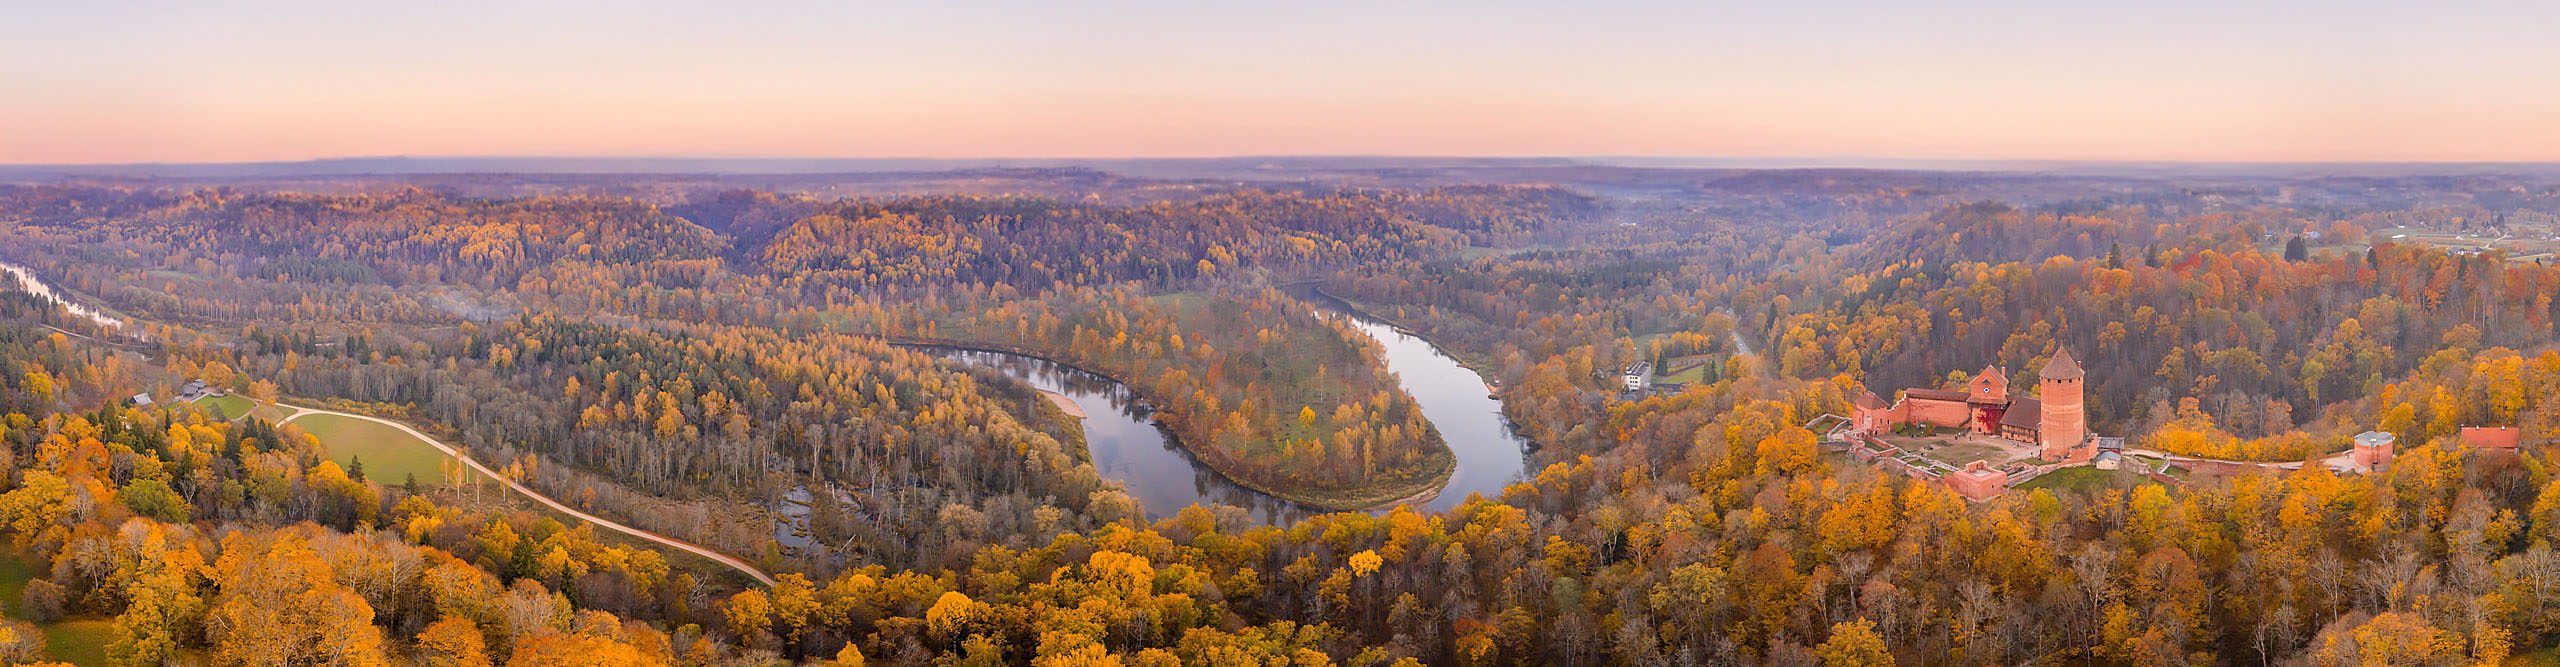 Amazing Aerial View over the Turaida Castle and Autumn Forest during Sunset, Sigulda, Latvia